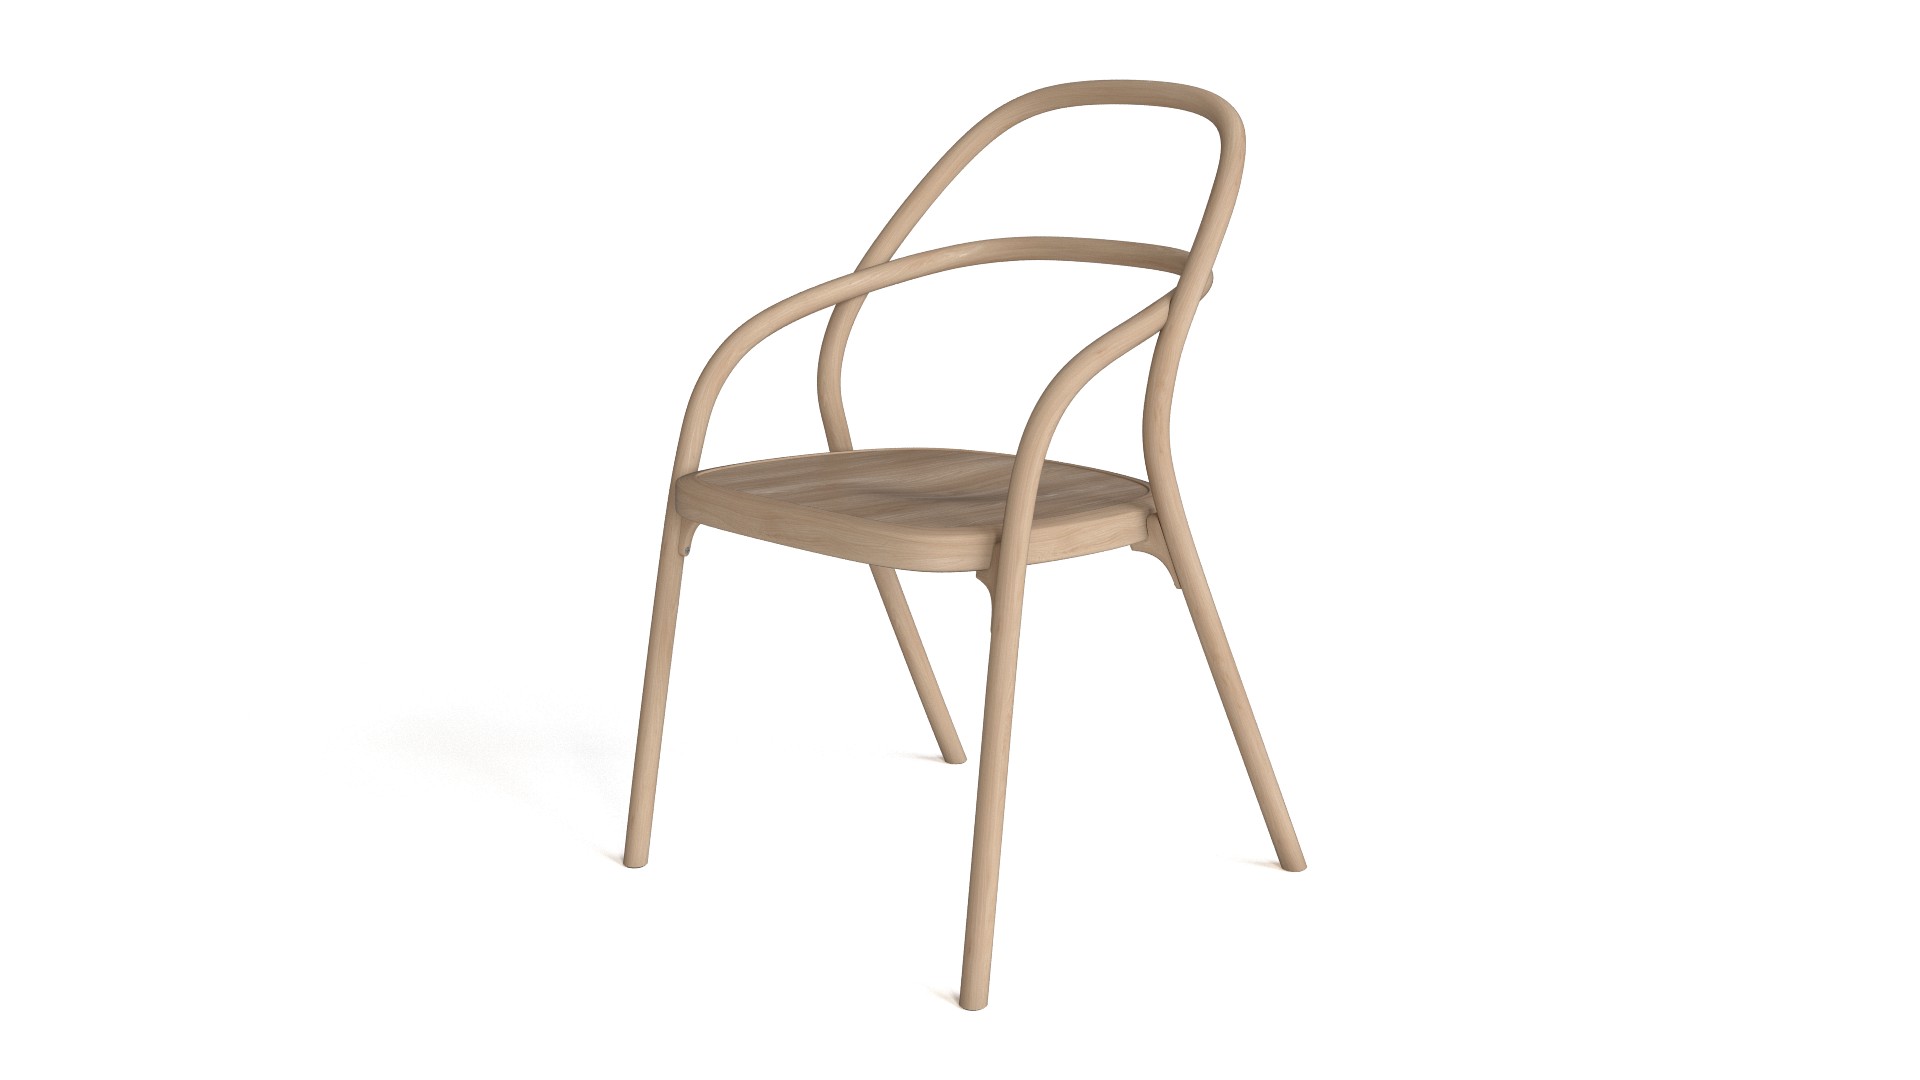 snak Arbejdsgiver servitrice TON - Chair 002 | FlyingArchitecture